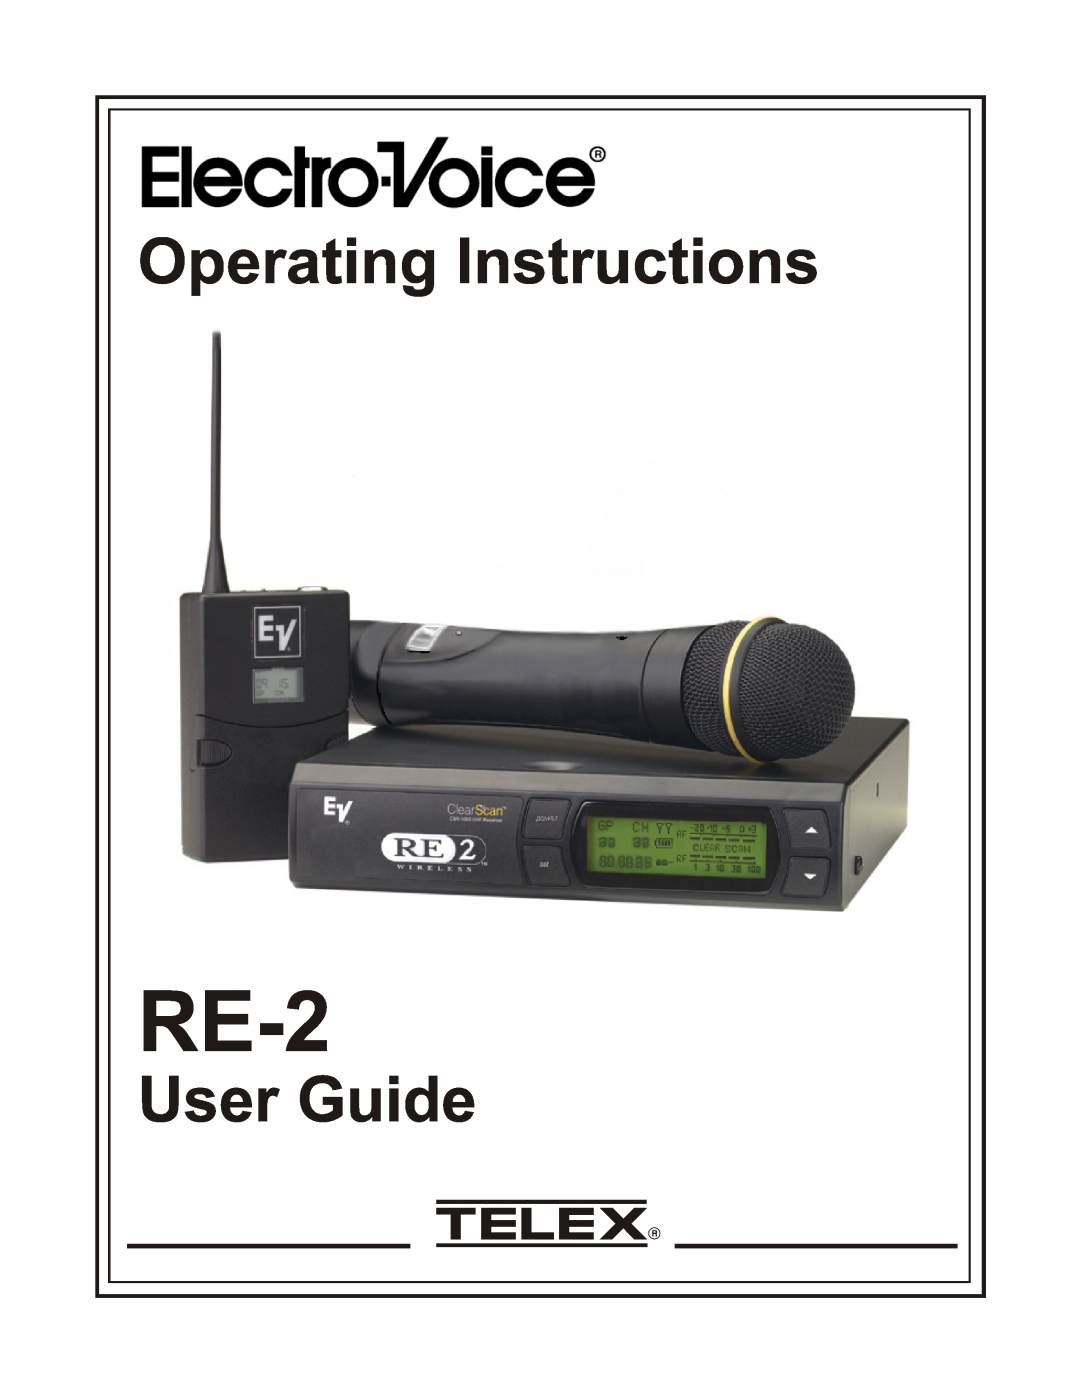 Telex RE-2 manual Operating Instructions, User Guide 